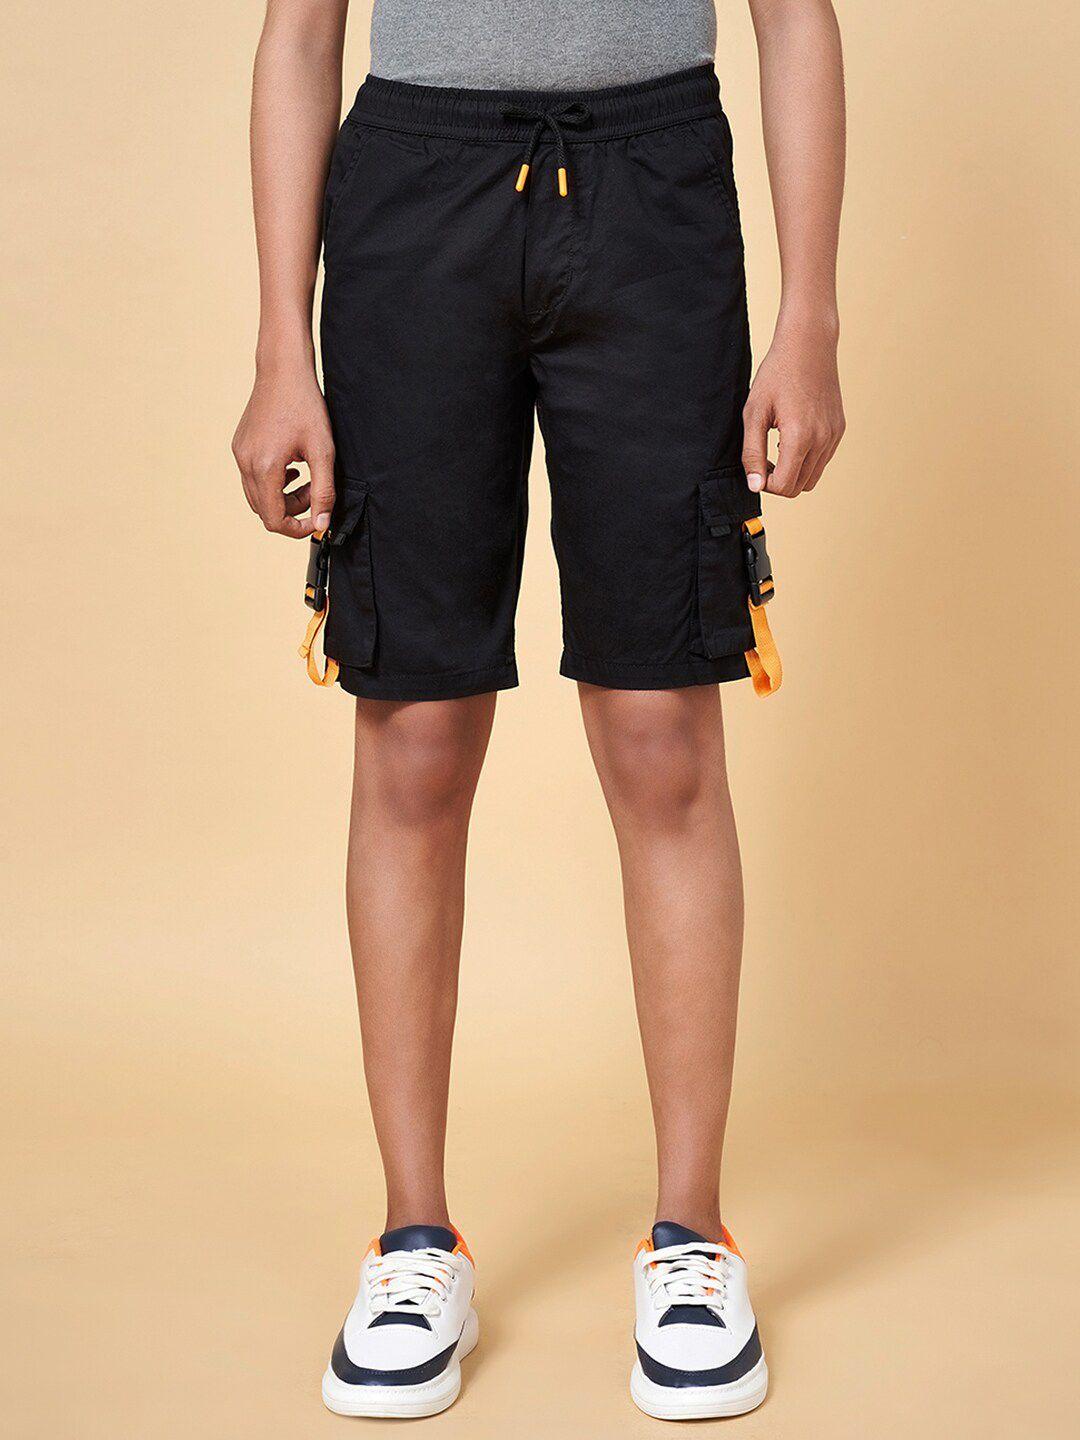 coolsters by pantaloons boys black cargo shorts